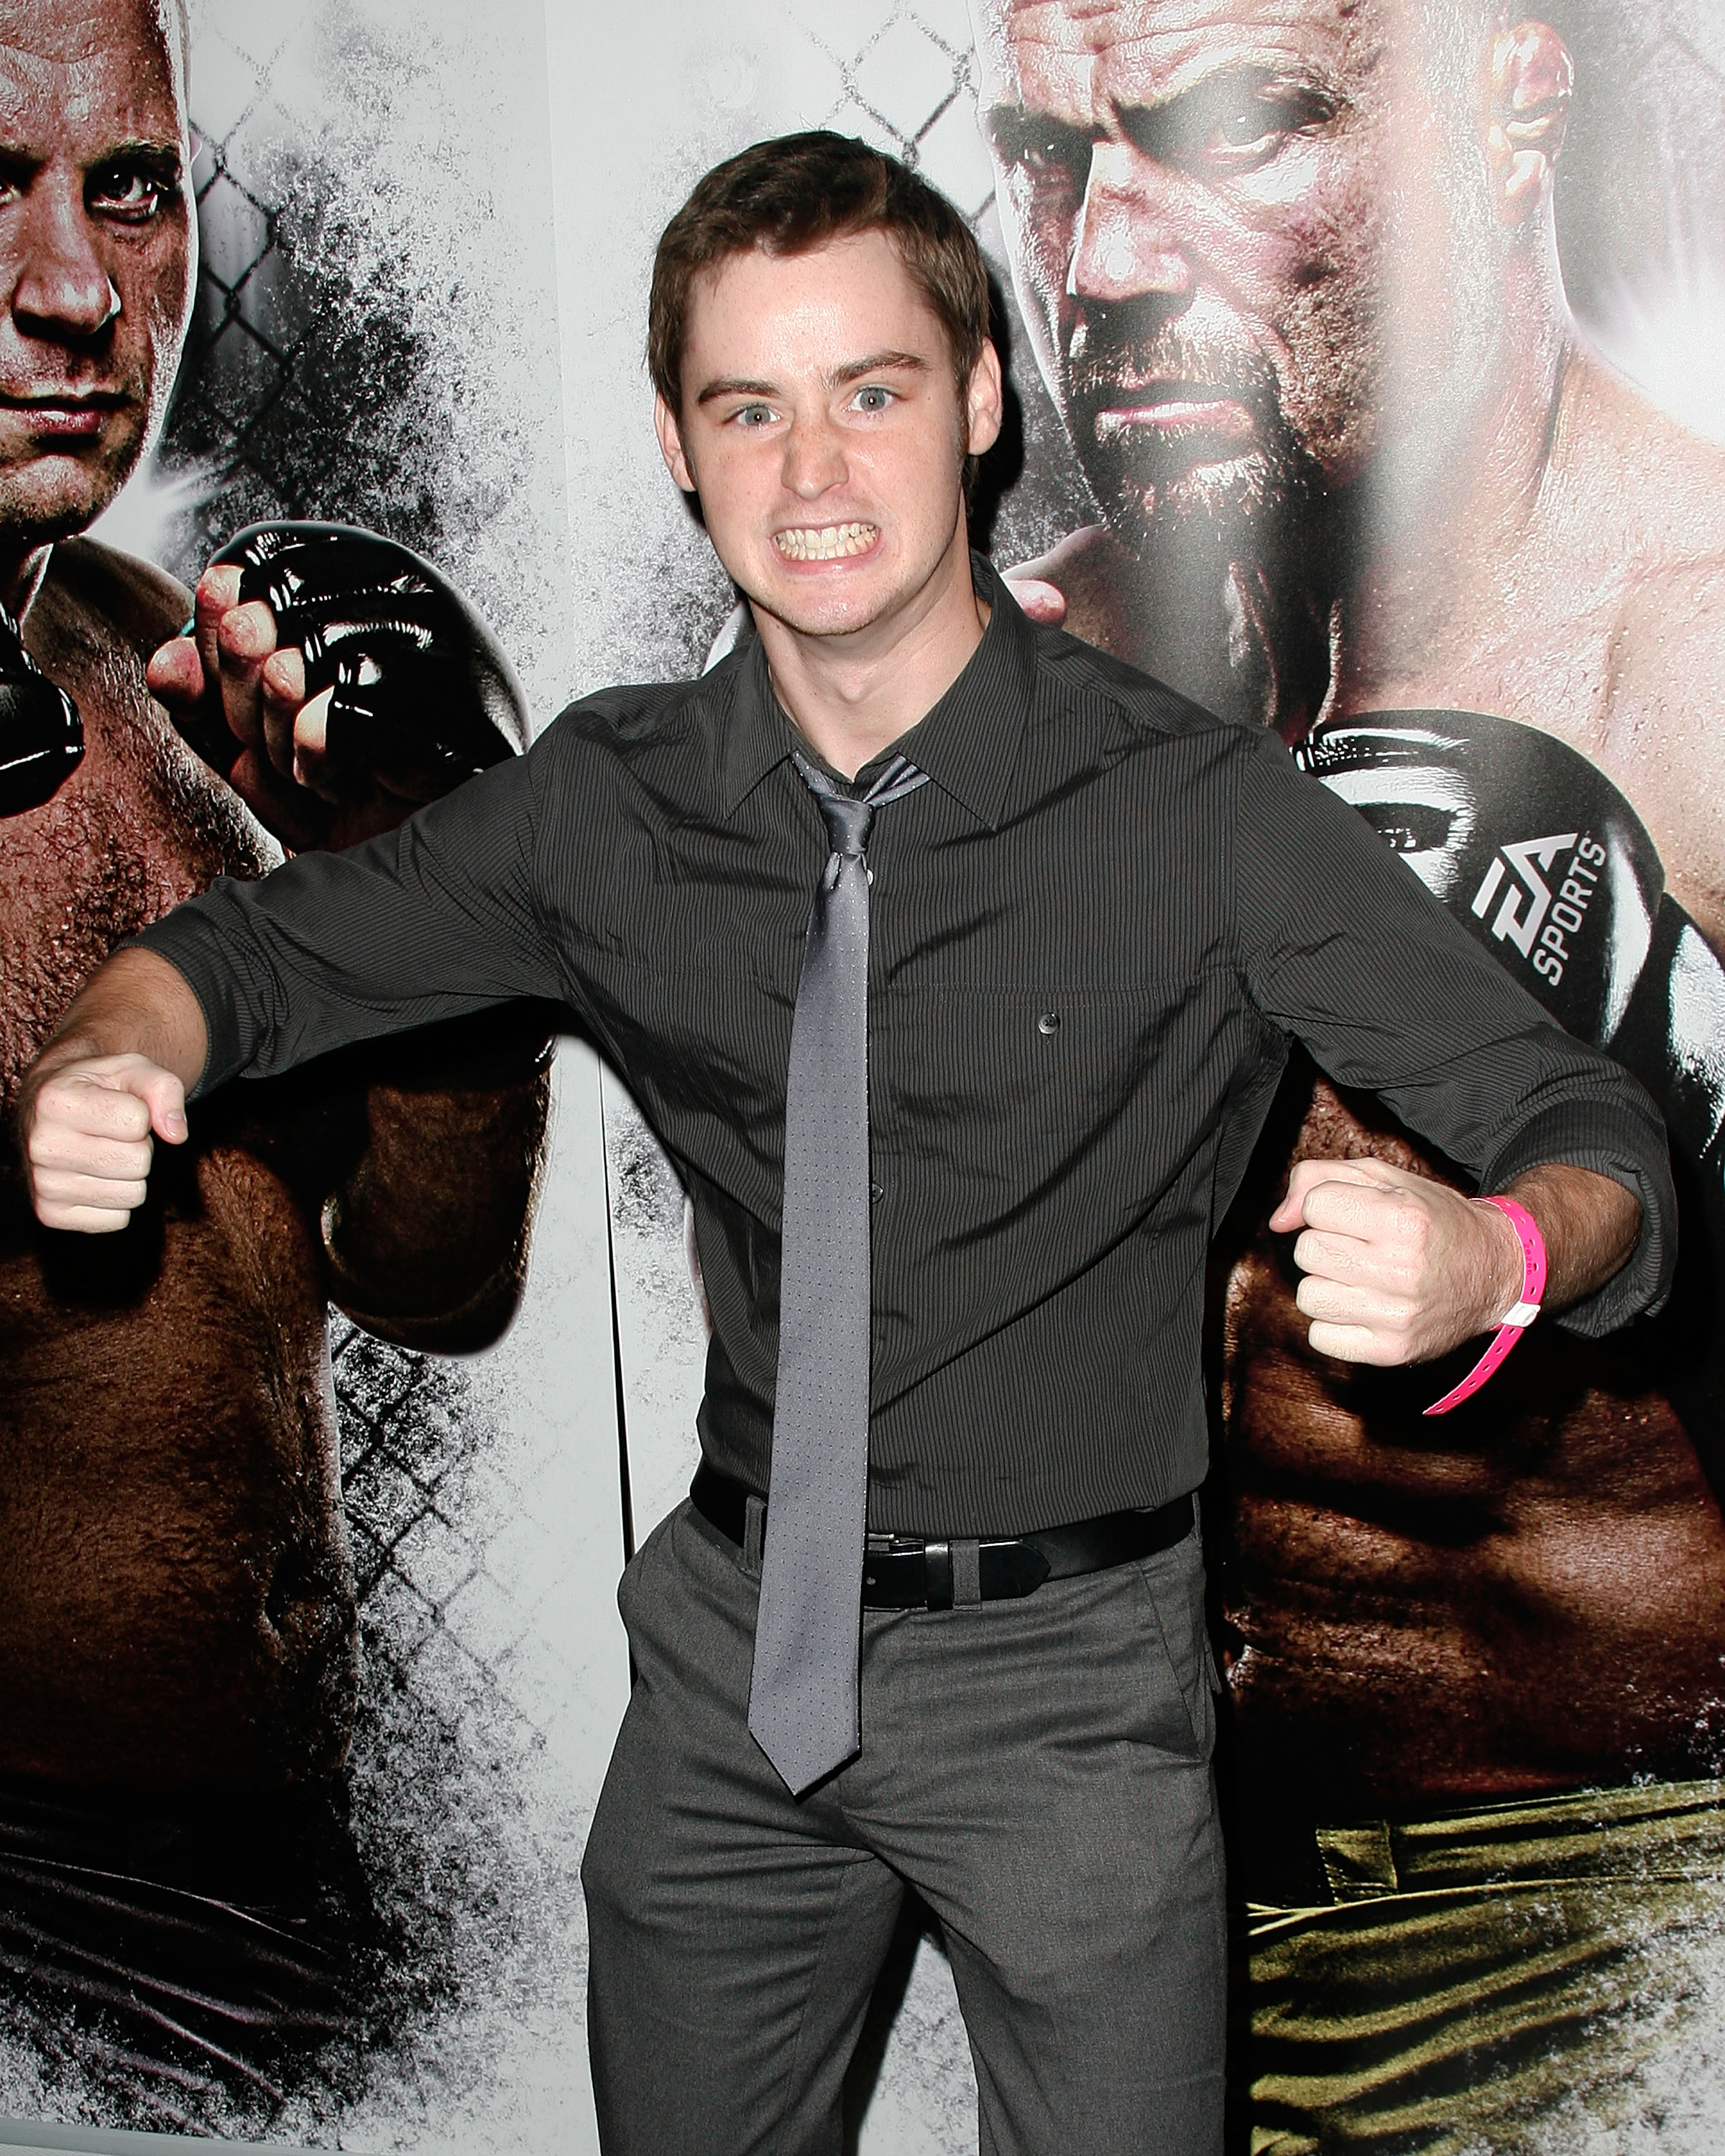 Dan Benson arrives at the EA Sports MMA video game launch party at The Highlands club in the Hollywood & Highland Center on October 19, 2010, in Hollywood, California. | Source: Getty Images